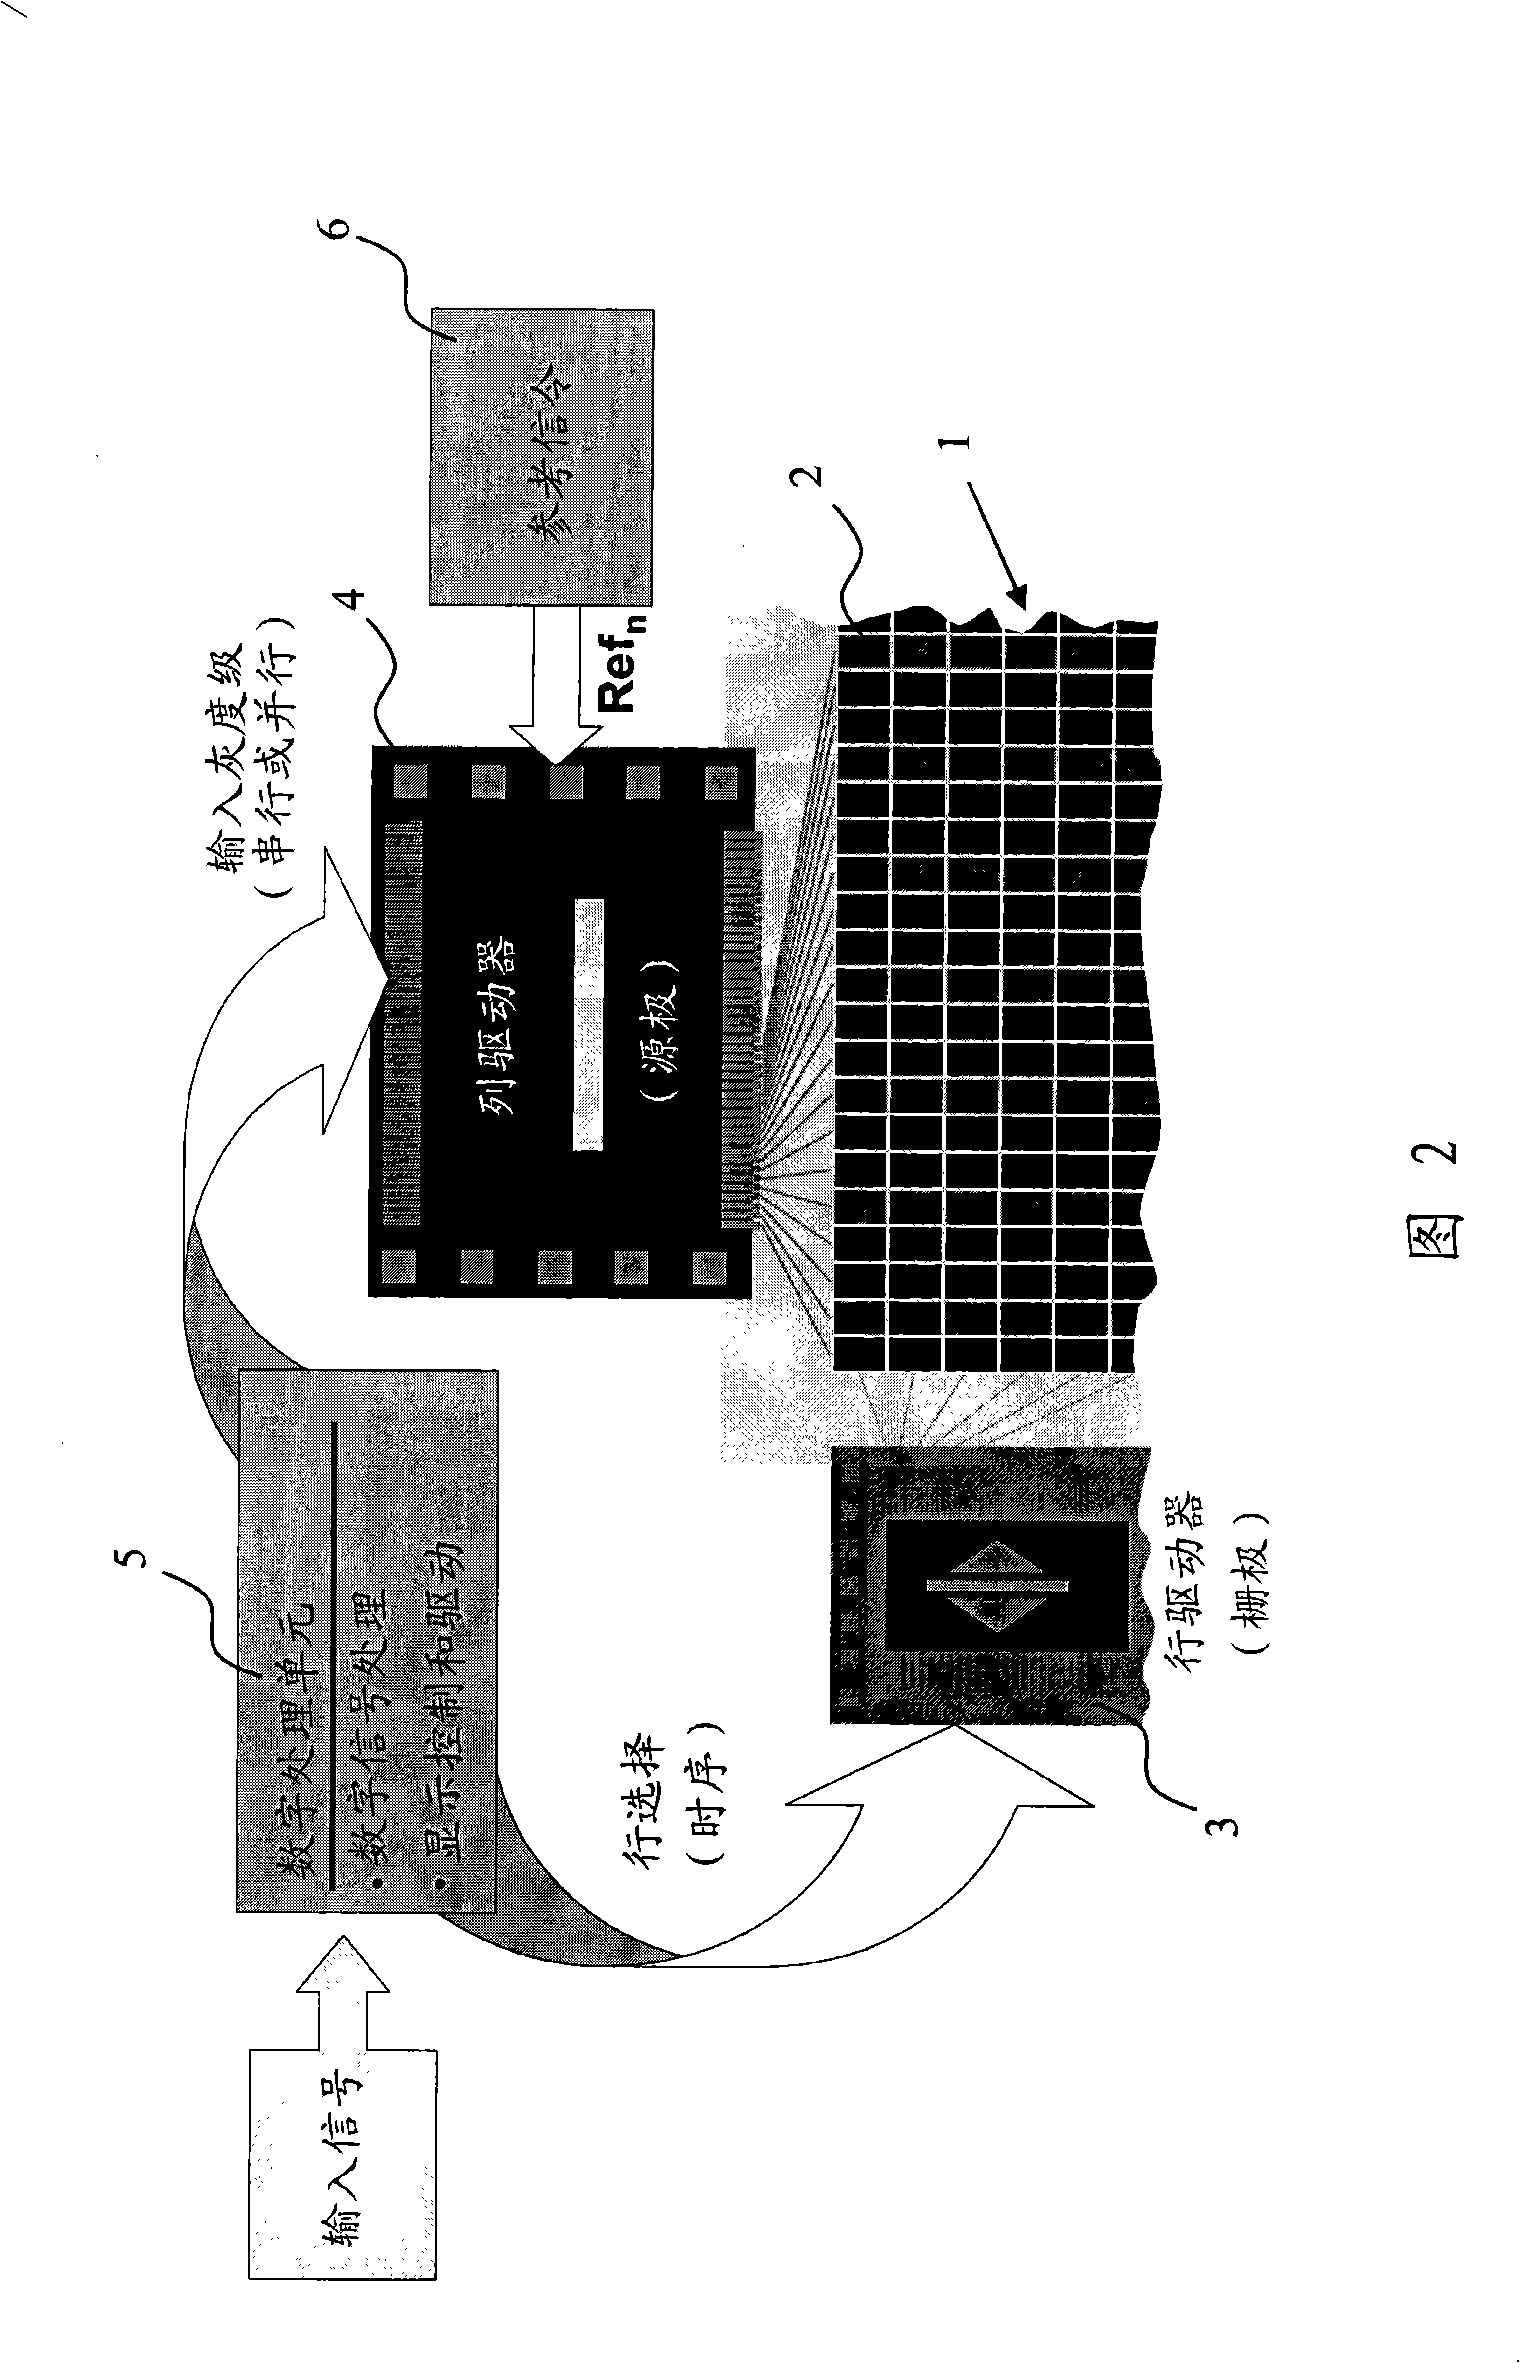 Method for displaying an image on an organic light emitting display and respective apparatus